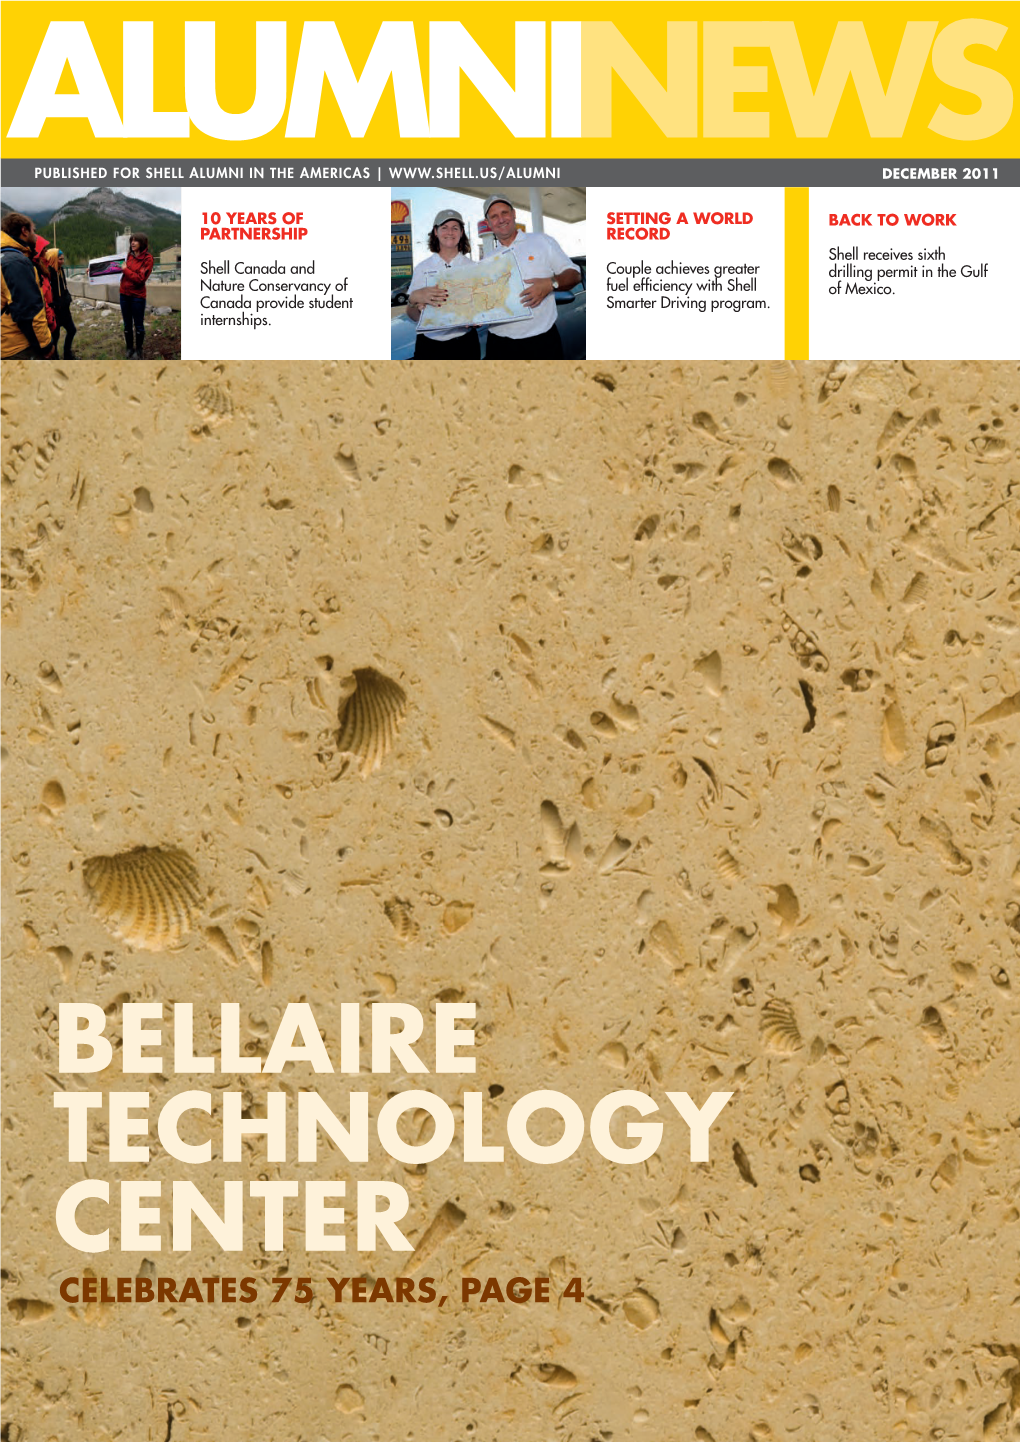 BELLAIRE TECHNOLOGY CENTER Celebrates 75 Years, Page 4 2 SHELL NEWS